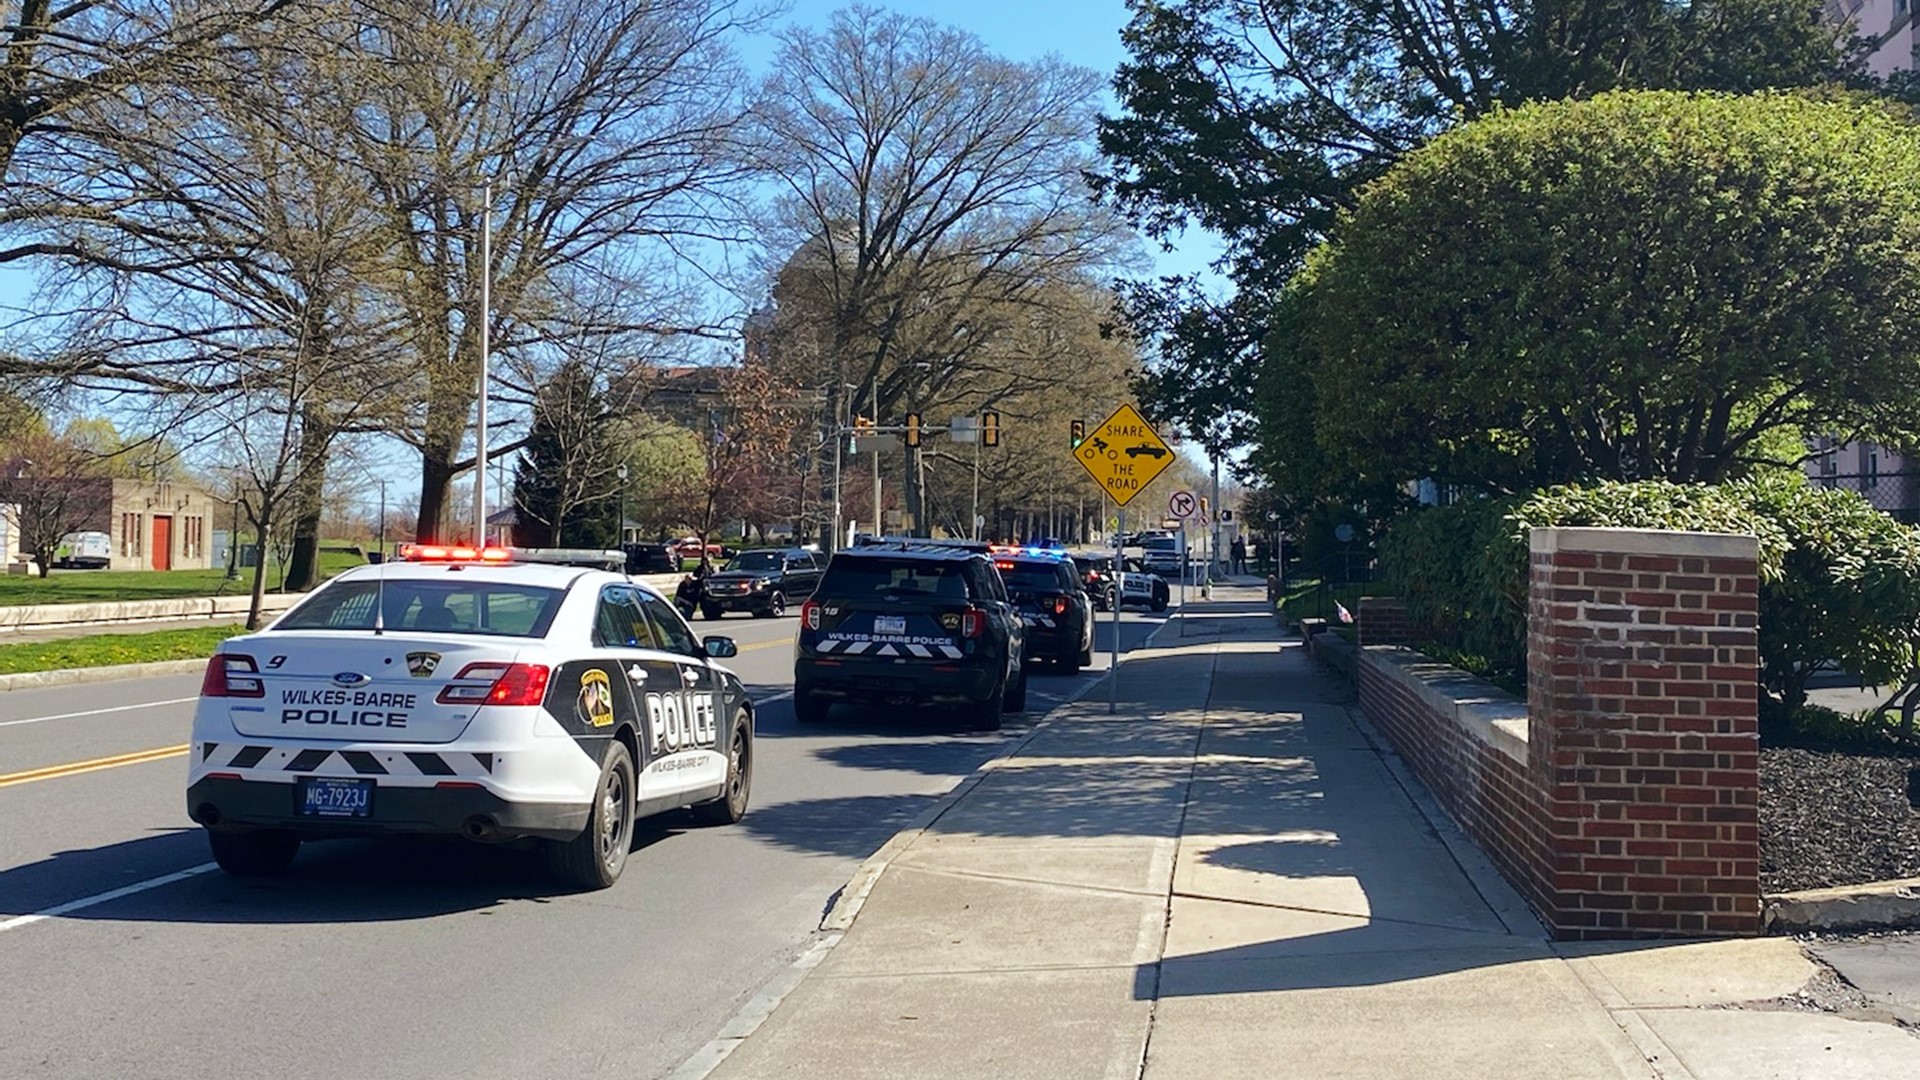 Part of River Street was closed and King's College was in a lockdown.